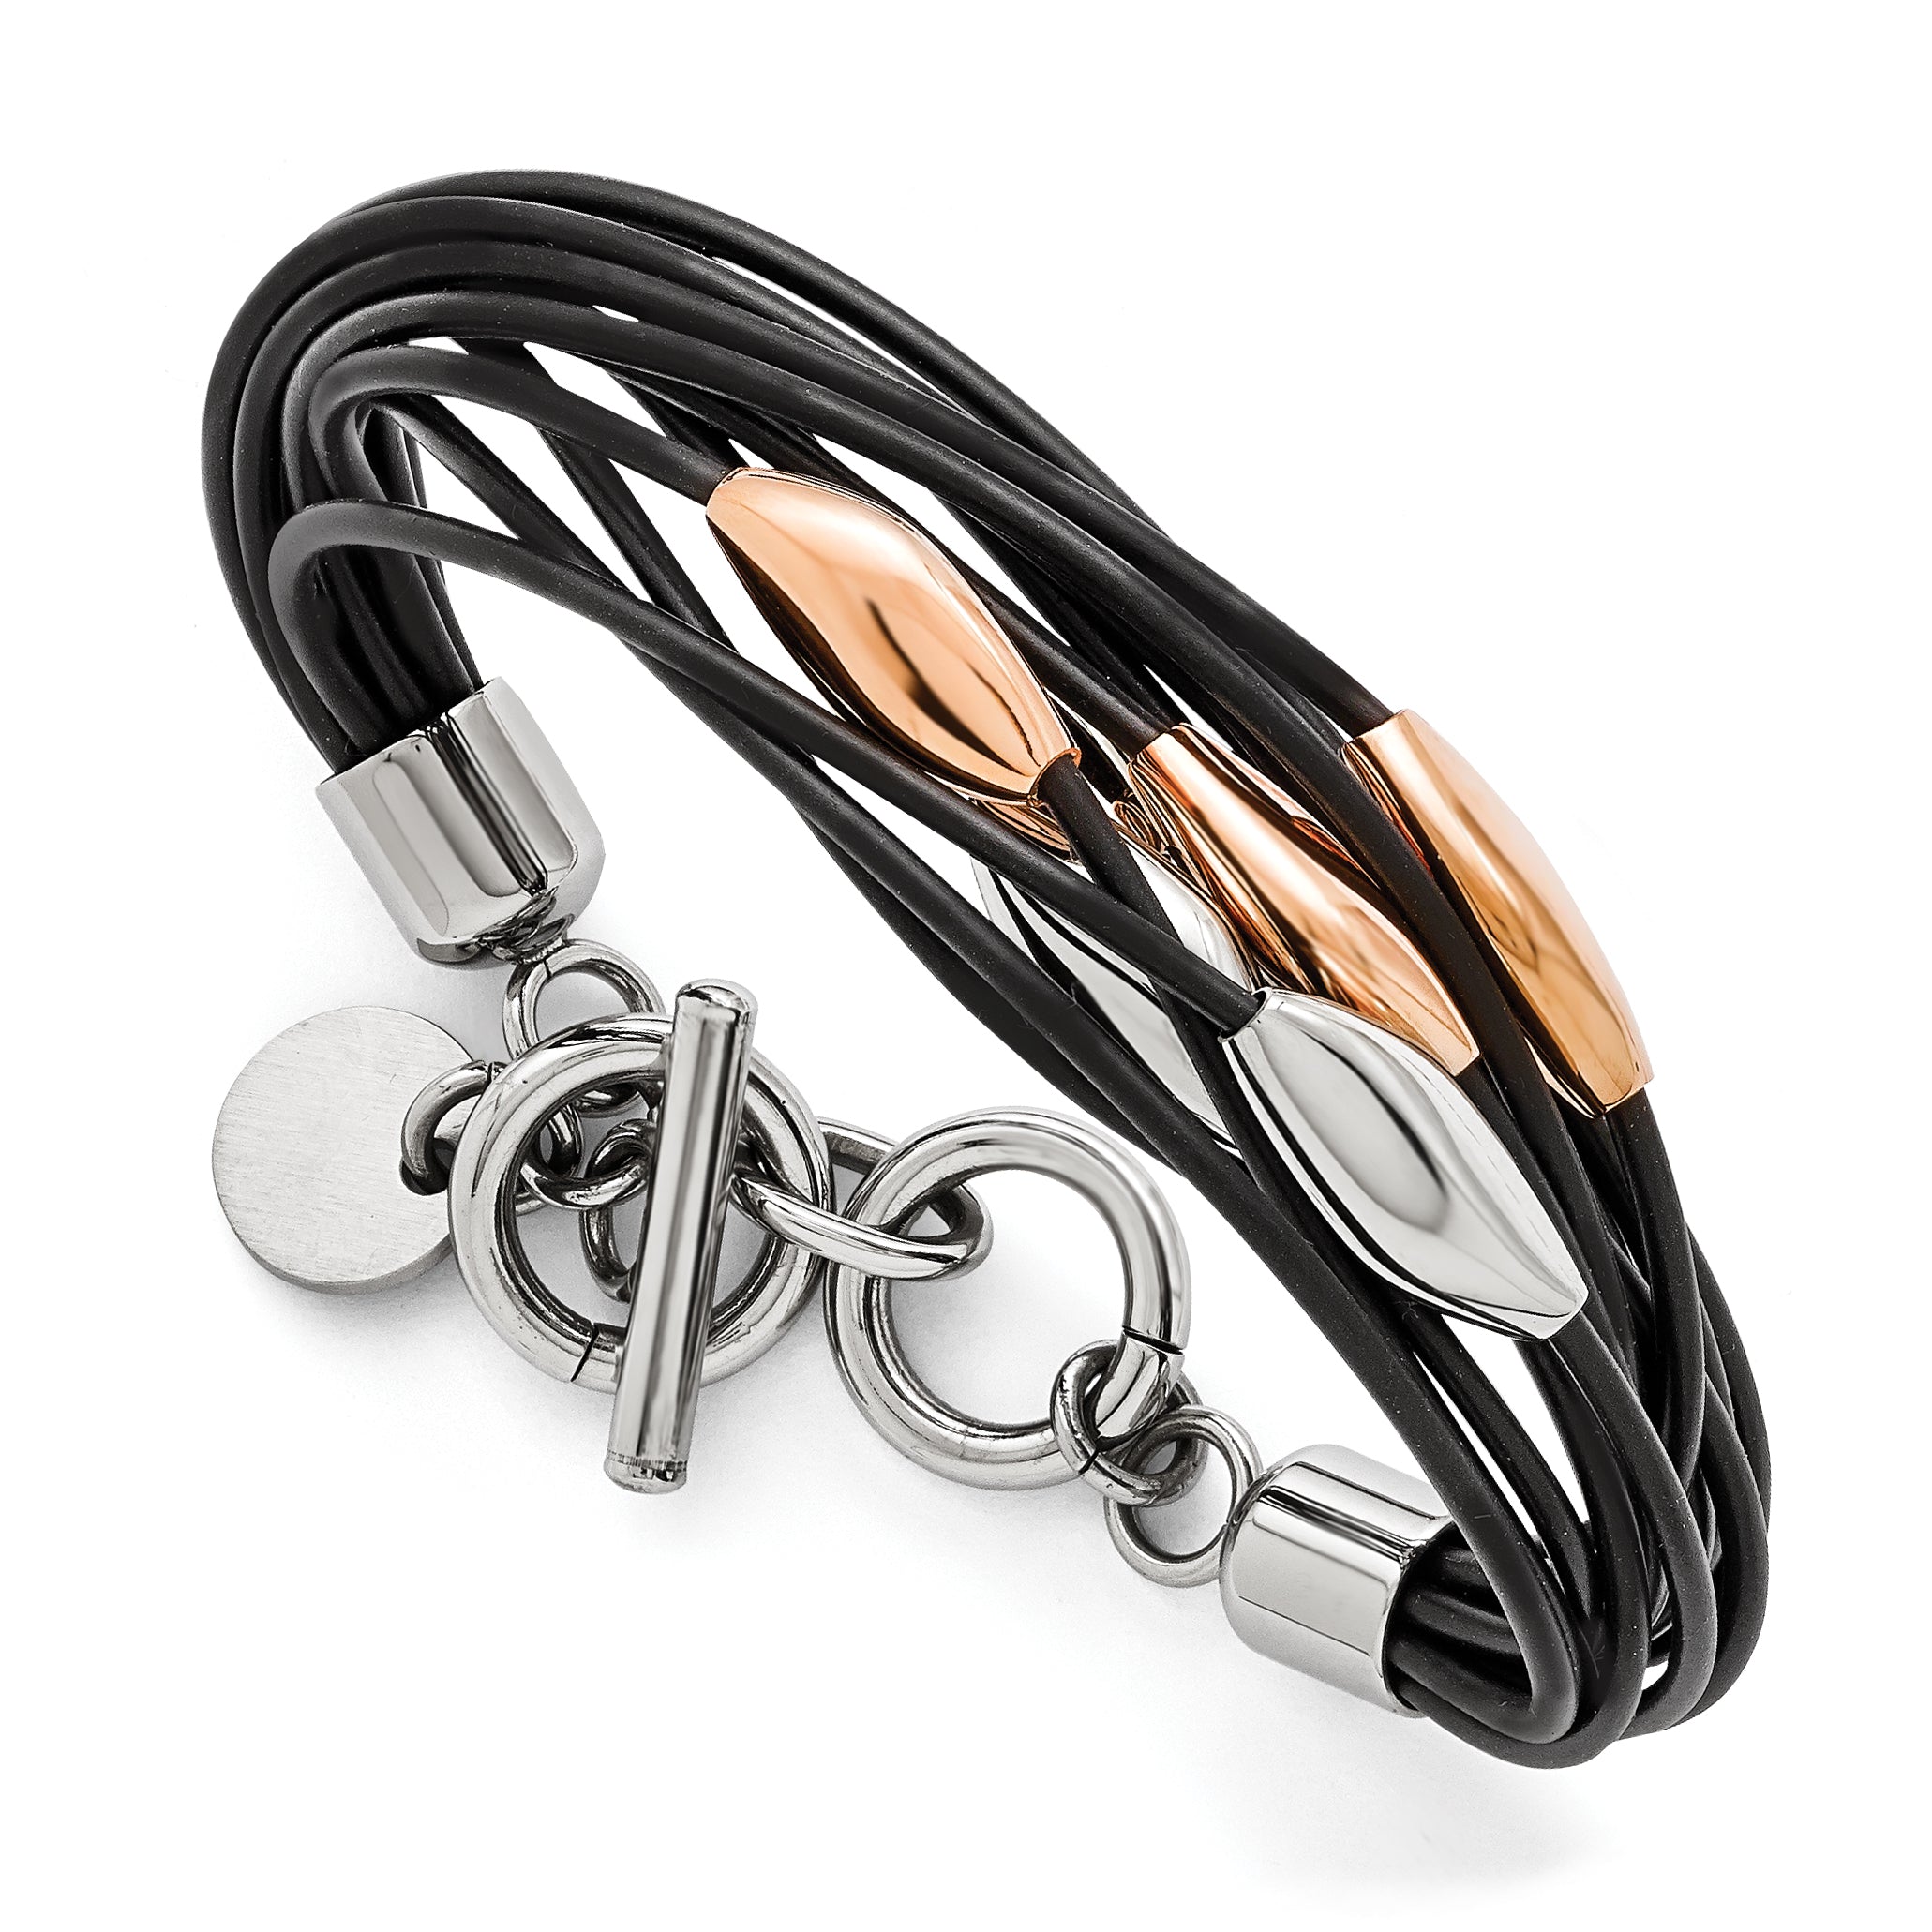 Stainless Steel Polished Pink IP-plated Black Rubber Bracelet